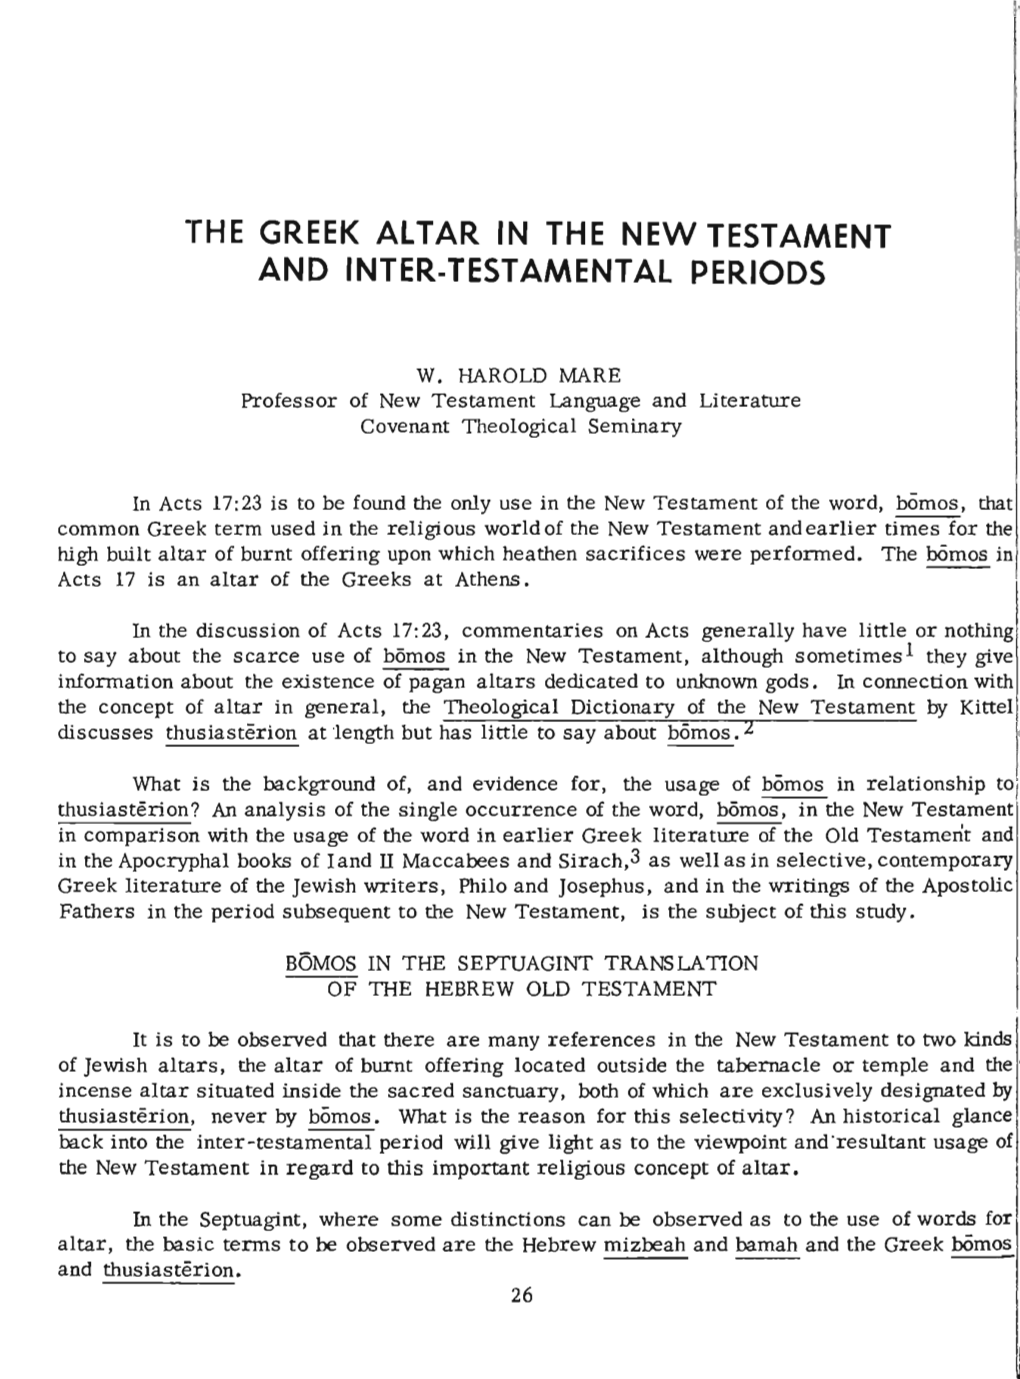 "The Greek Altar in the New Testament and Inter-Testamental